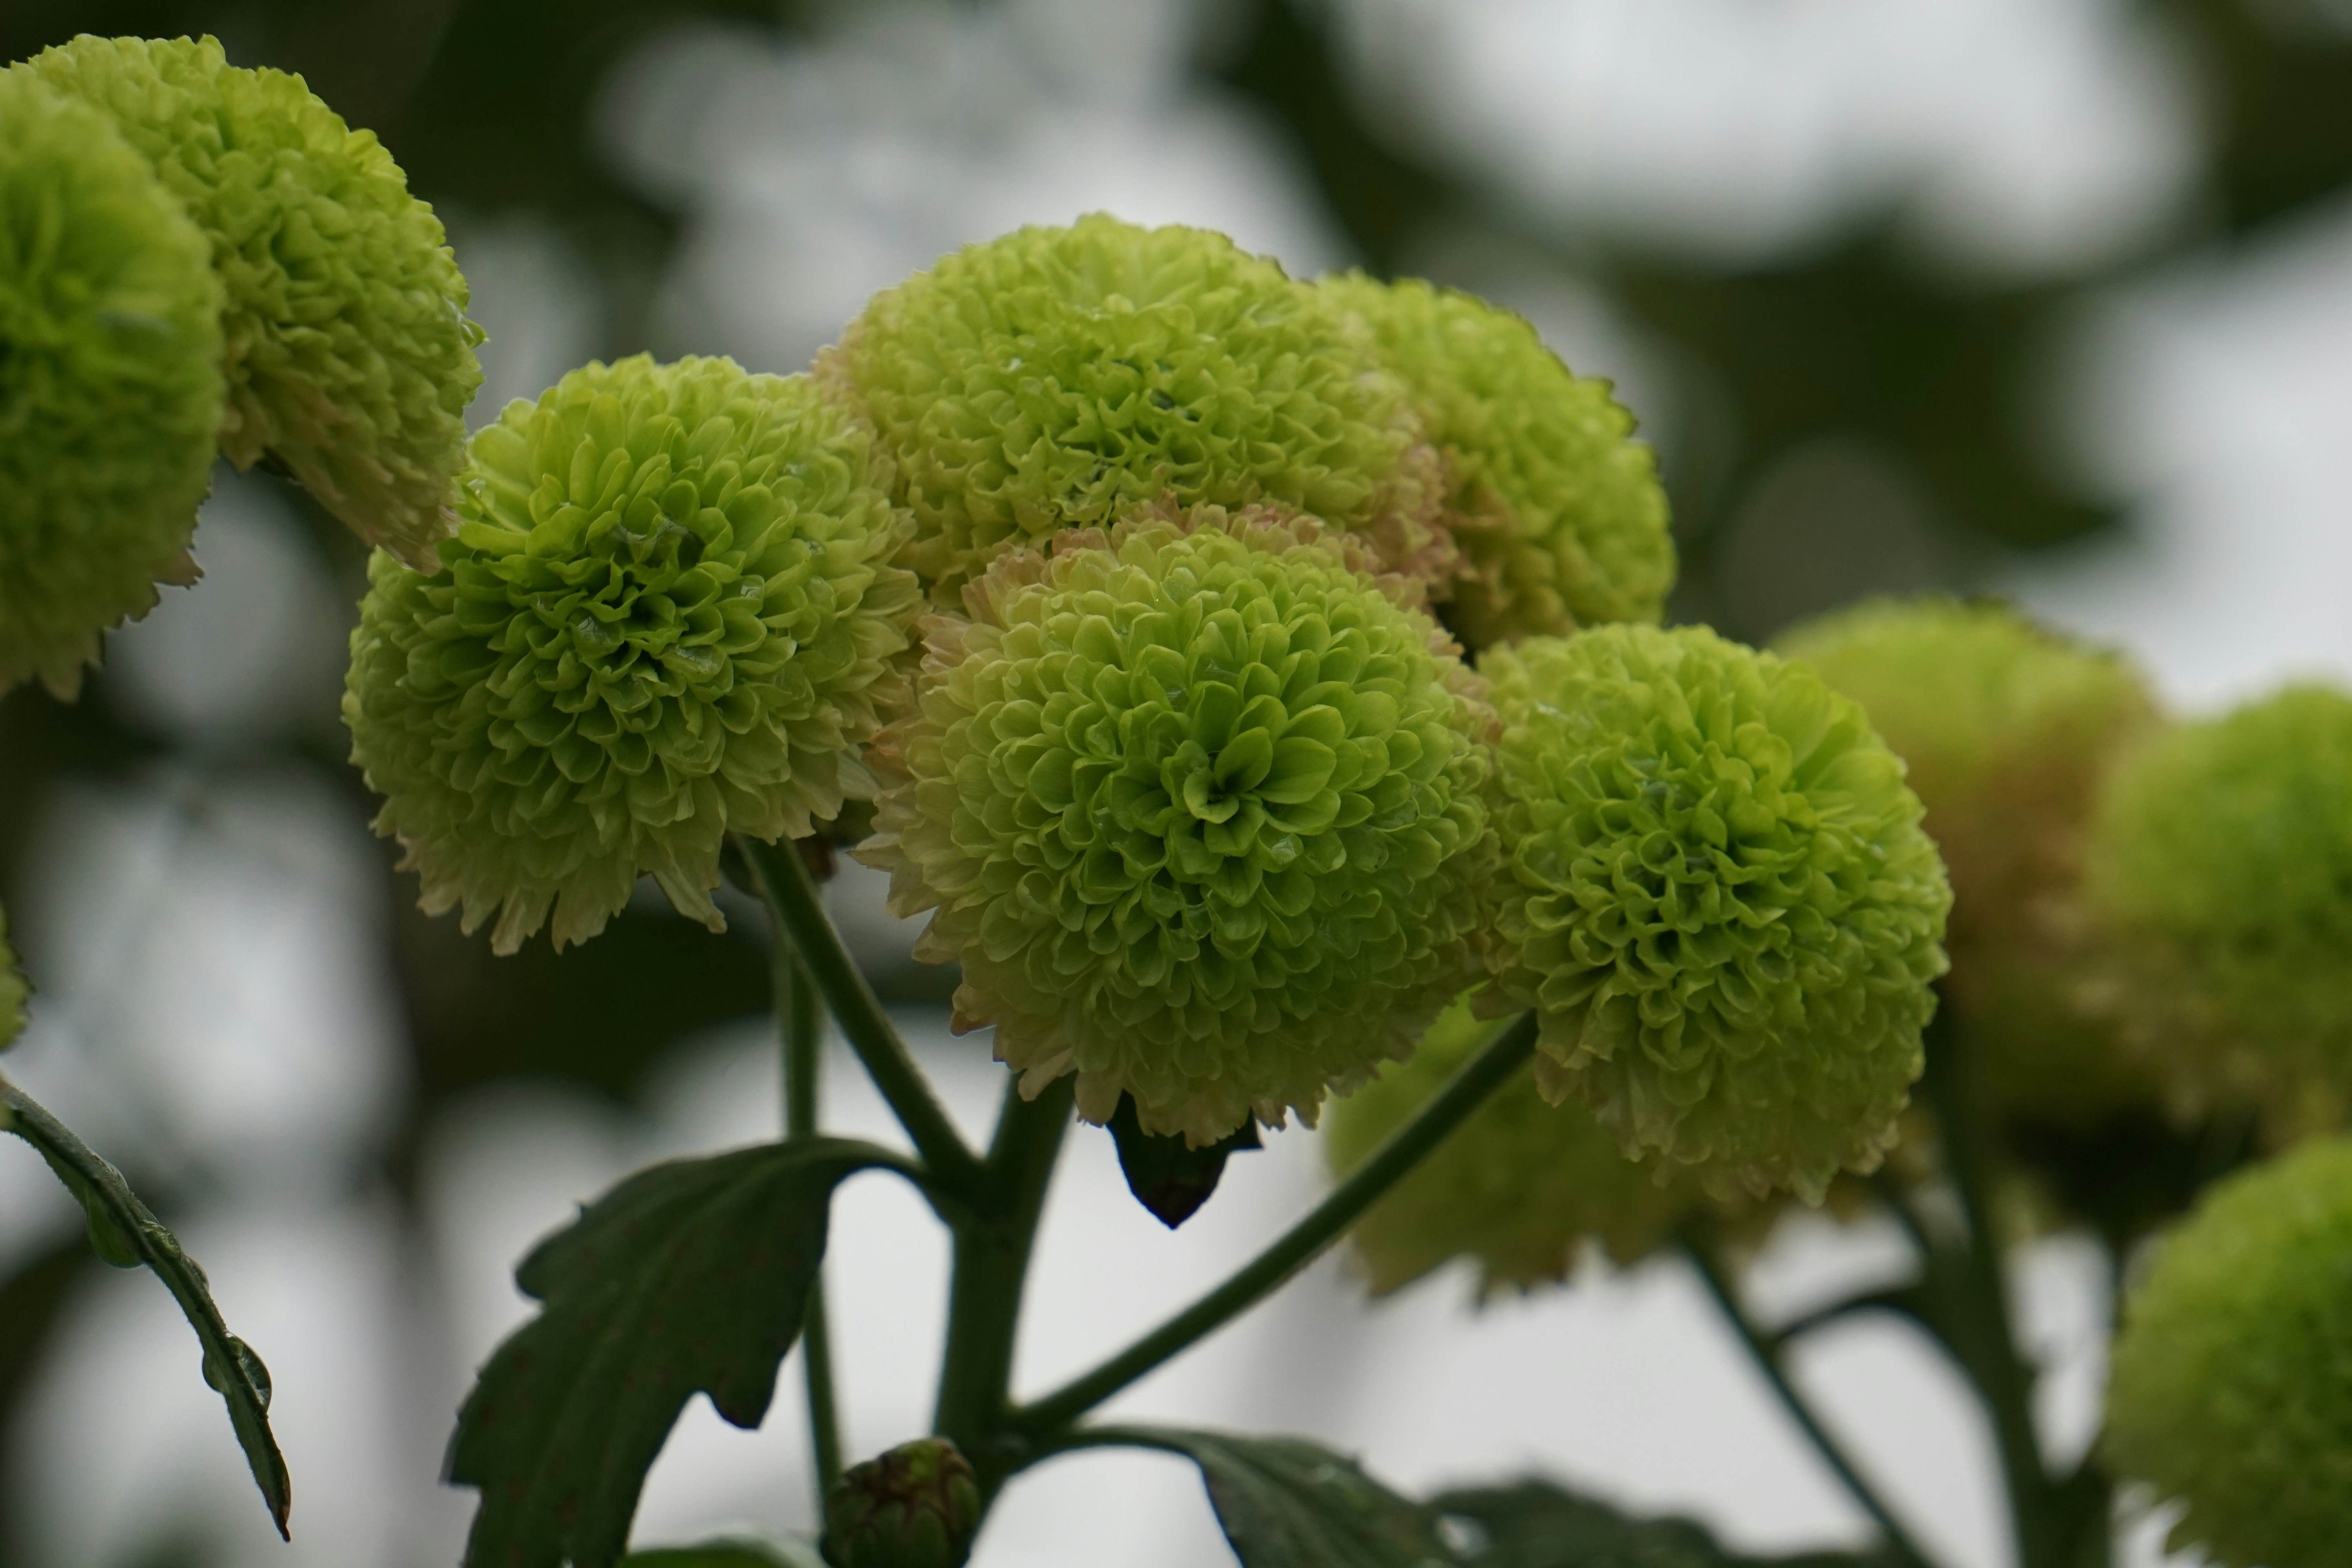 Chrysanthemum Green Button Pompon Green chrysanthemums symbolize hope, good fortune, rebirth, rest, truth, good health, and optimism.